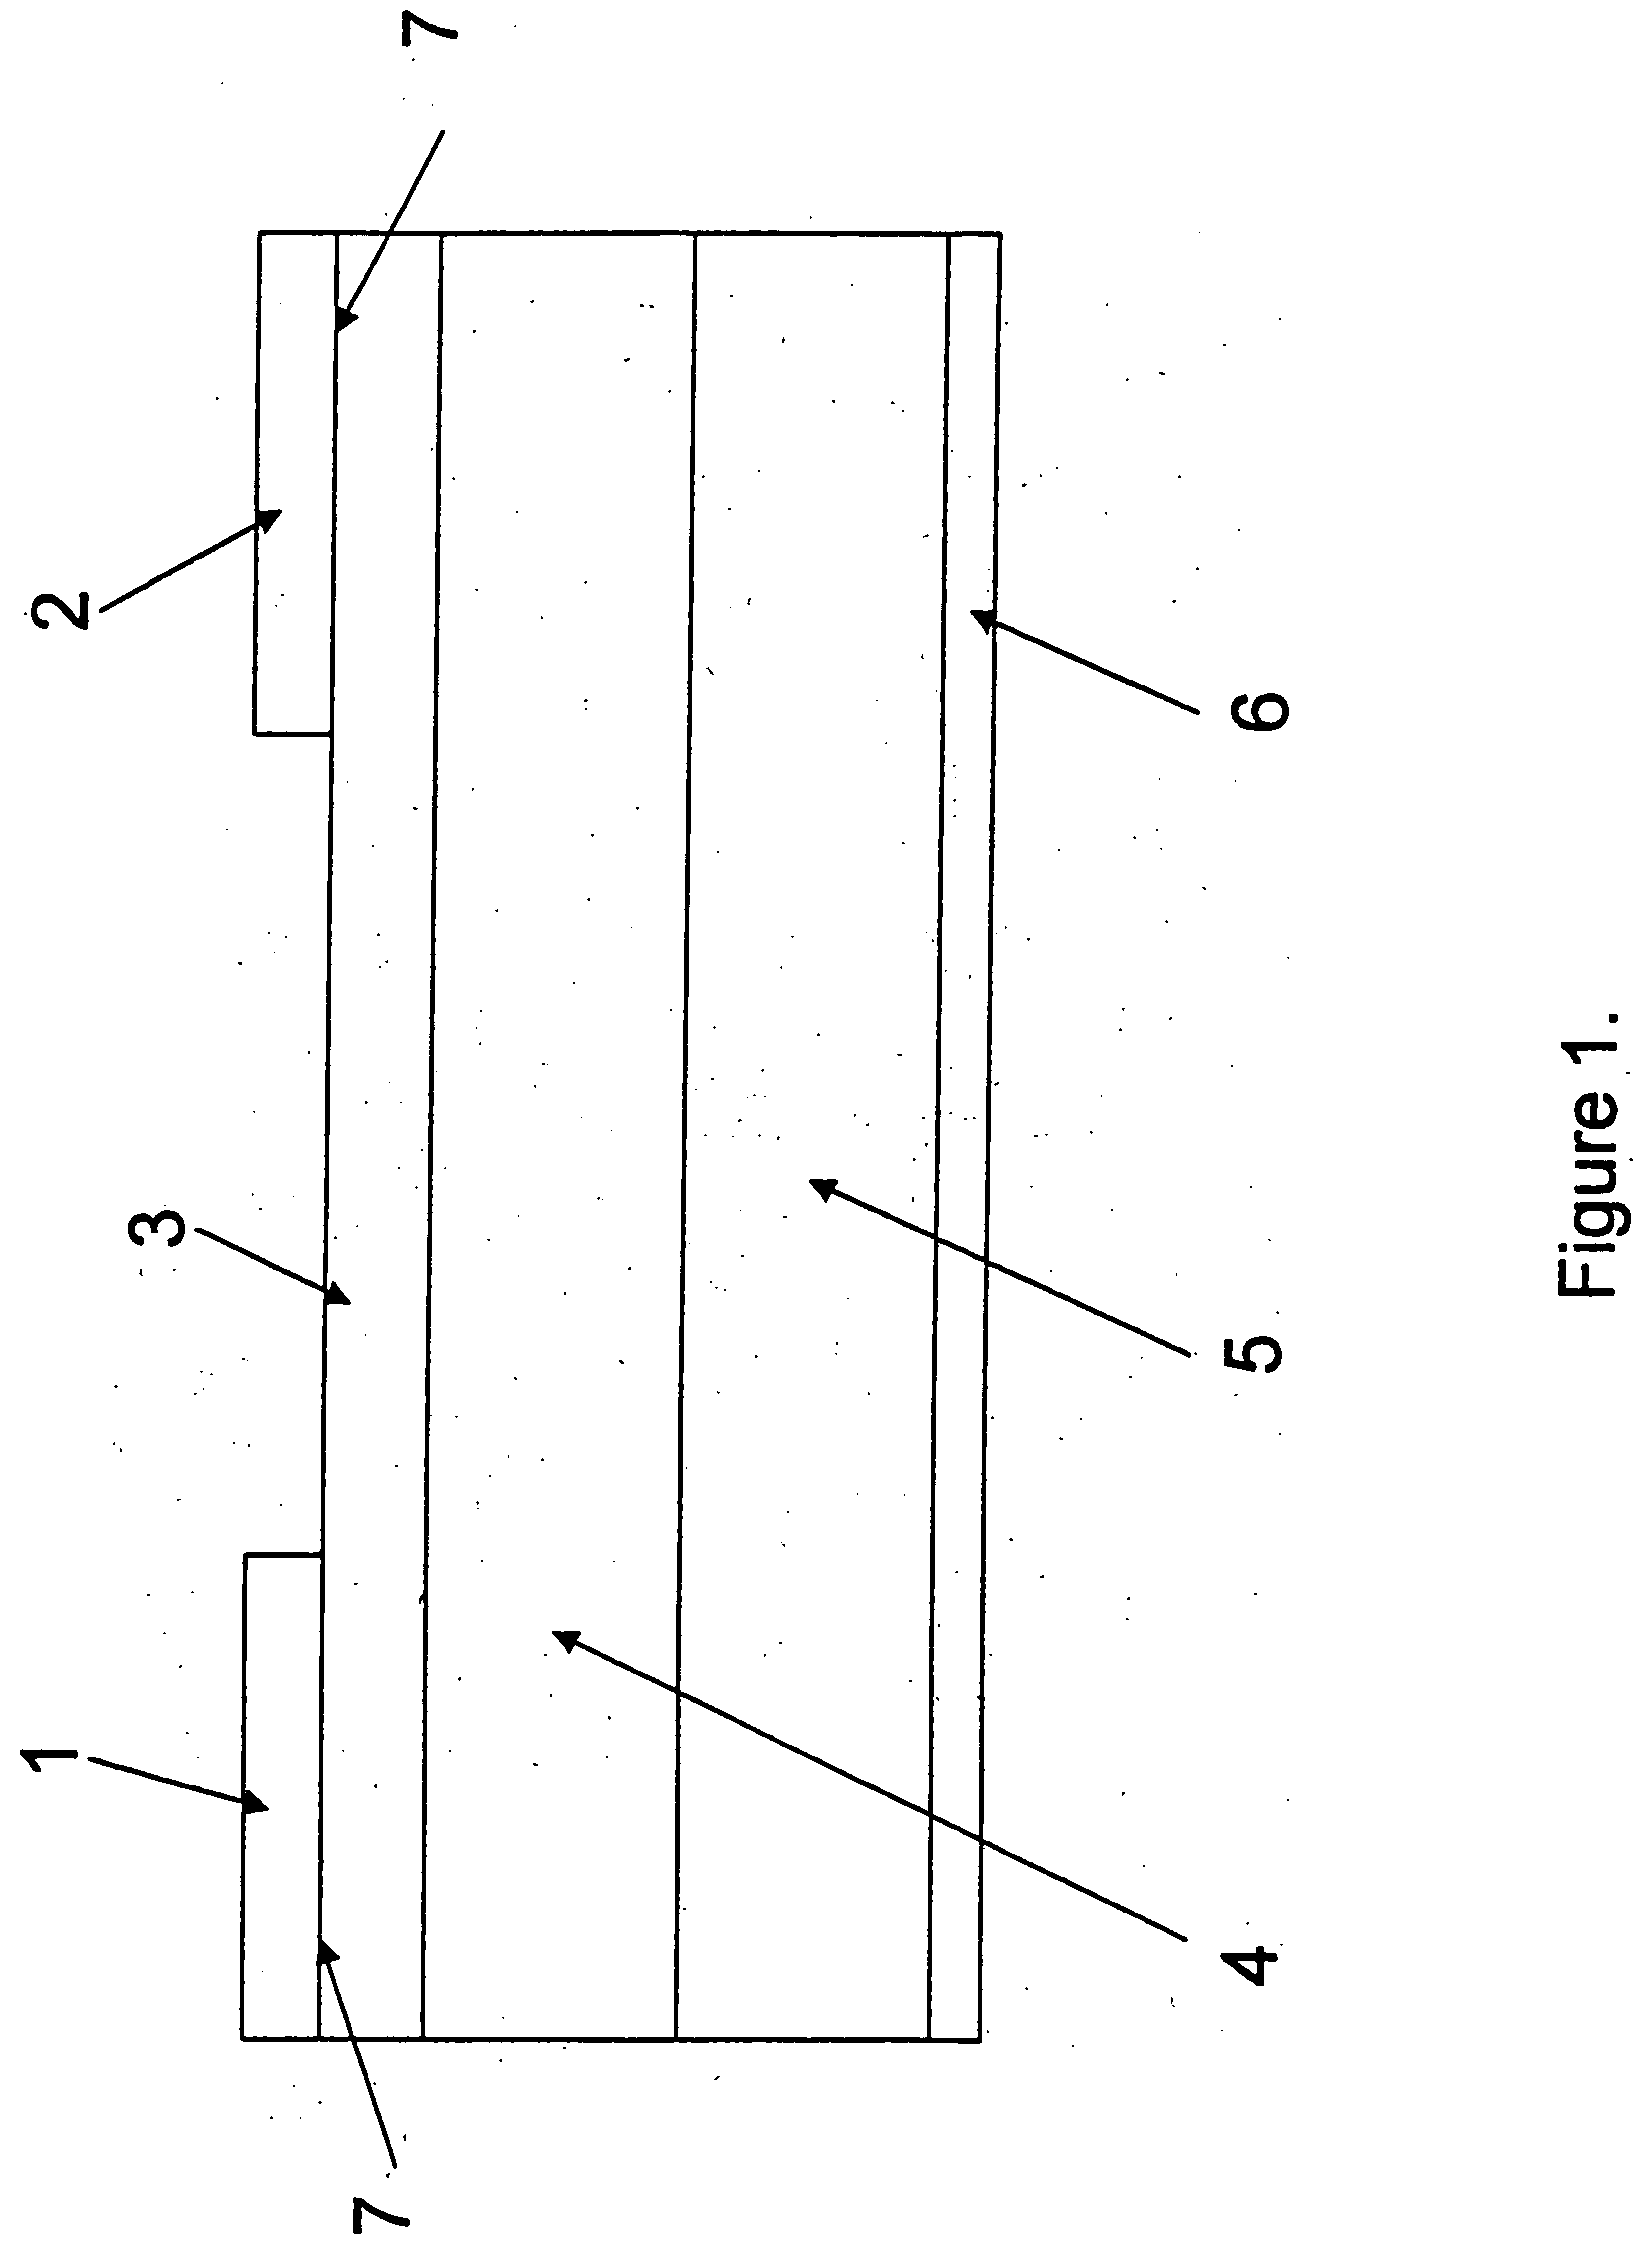 Single and double-gate pseudo-fet devices for semiconductor materials evaluation